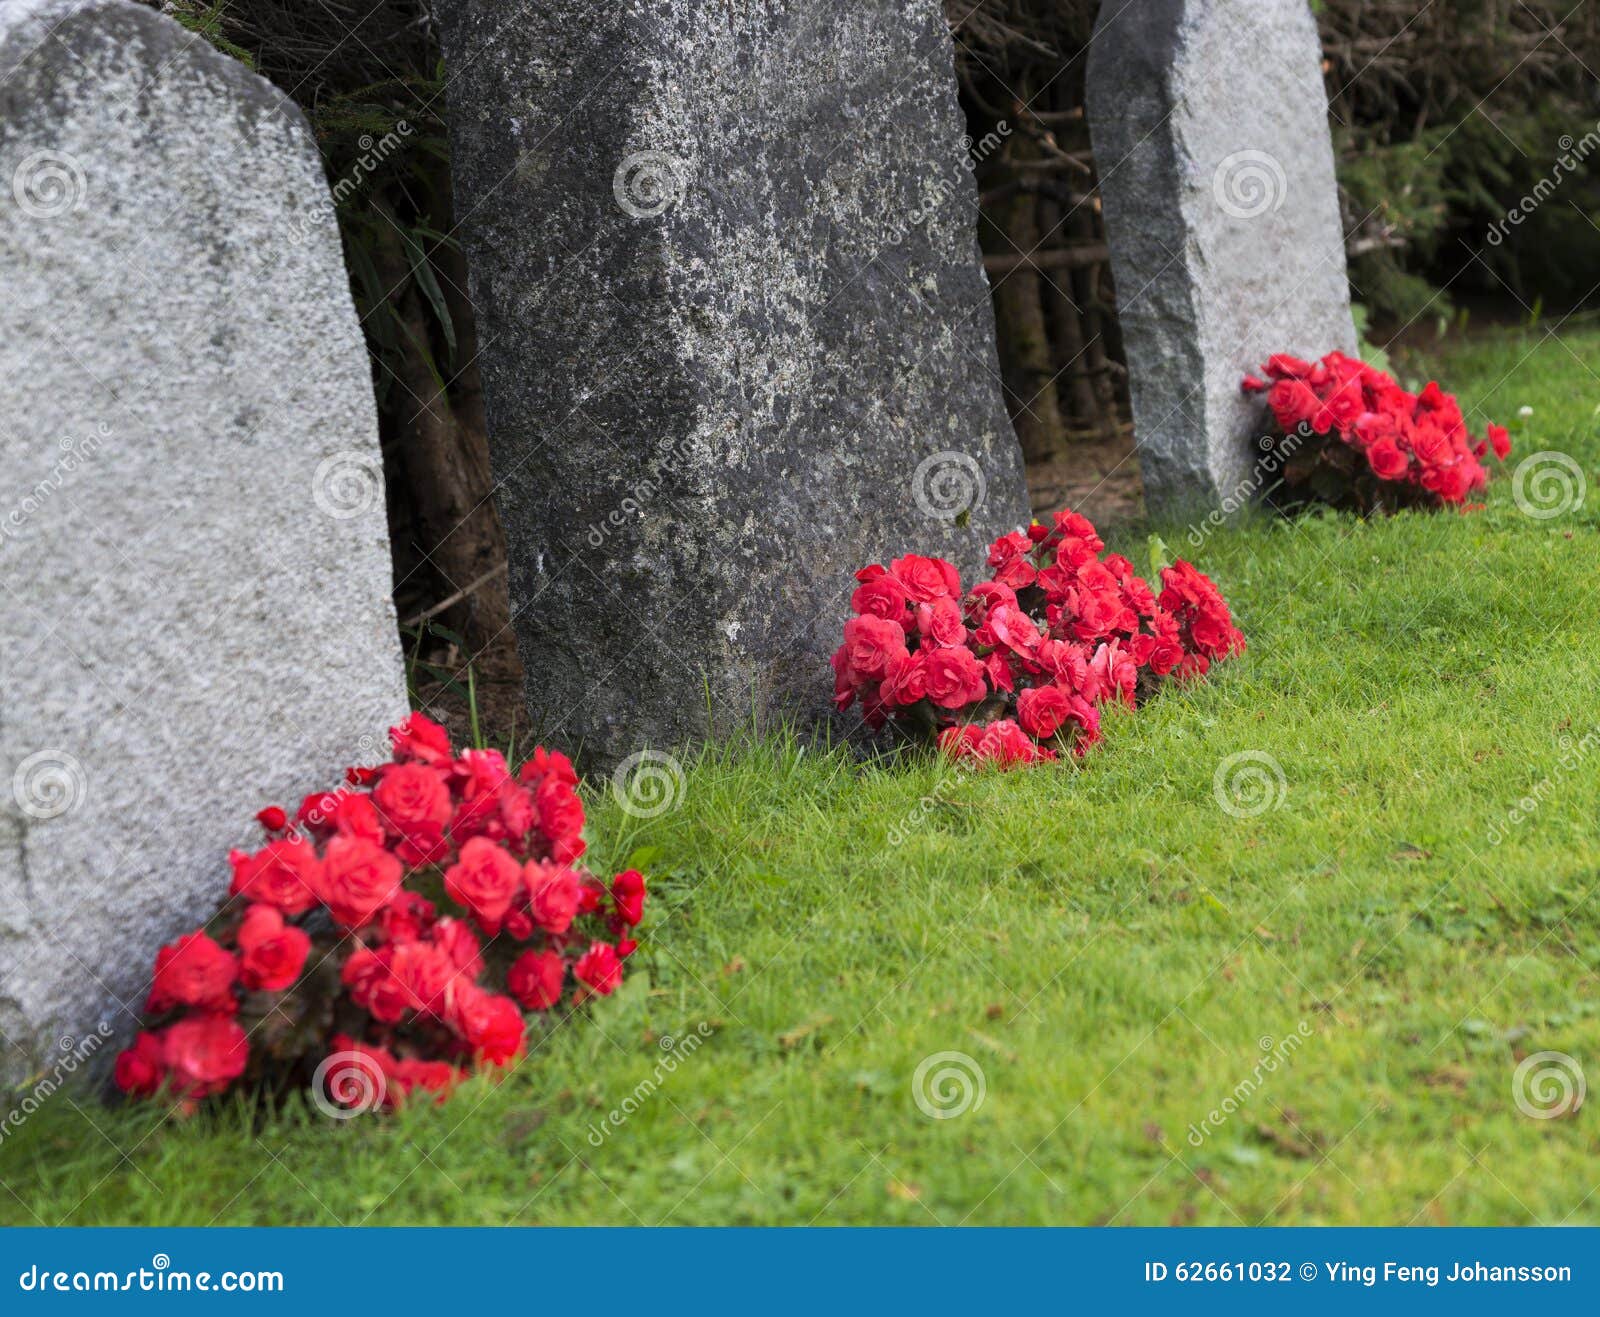 red roses on graveyard